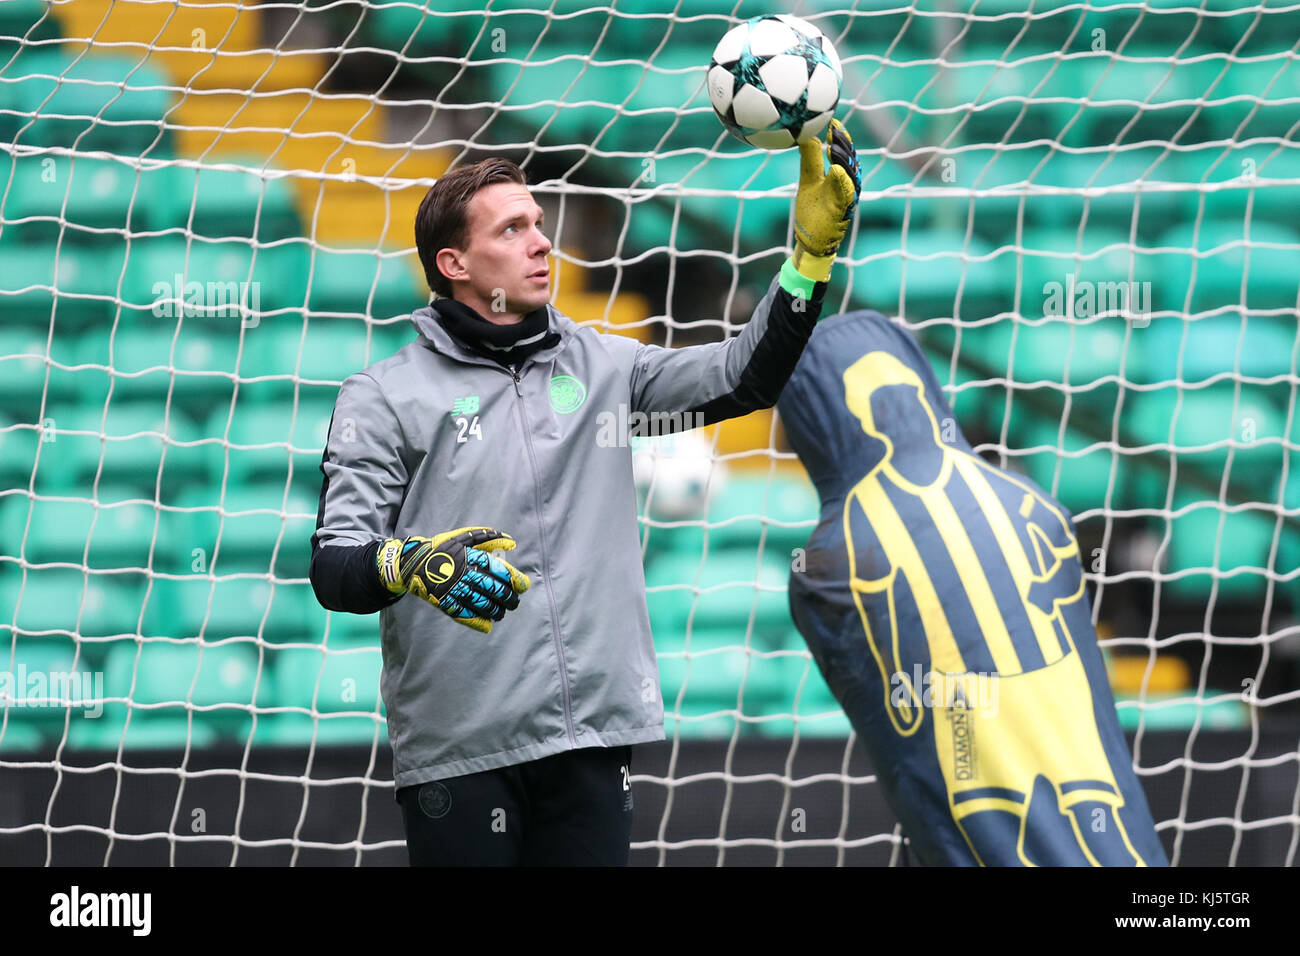 Celtic goalkeeper Dorus de Vries during the training session at Celtic Park, Glasgow. PRESS ASSOCIATION Photo. Picture date: Tuesday November 21, 2017. See PA story SOCCER Celtic. Photo credit should read: Jane Barlow/PA Wire Stock Photo